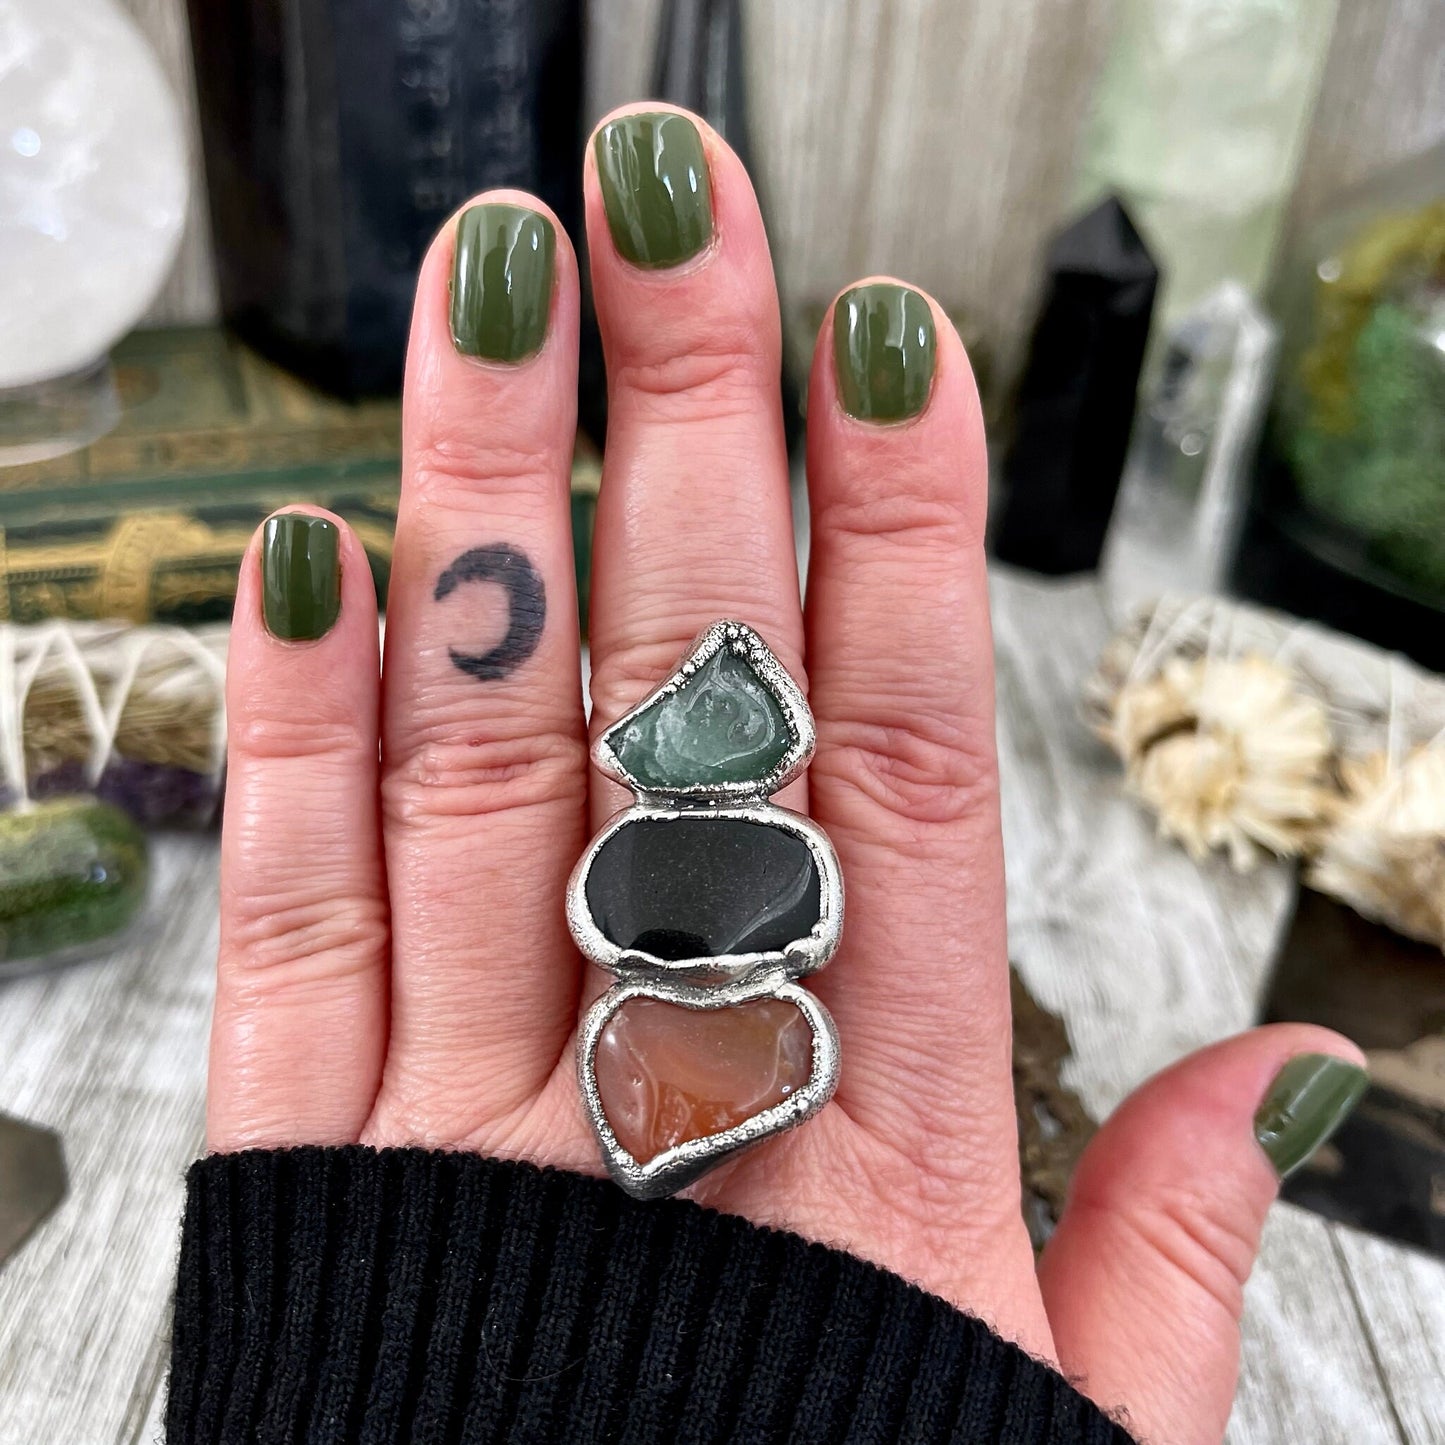 Size 9 Crystal Ring - Three Stone Ring Black Onyx Carnelian Aventurine Silver Ring / Foxlark Collection - One of a Kind / Crystal Jewelry